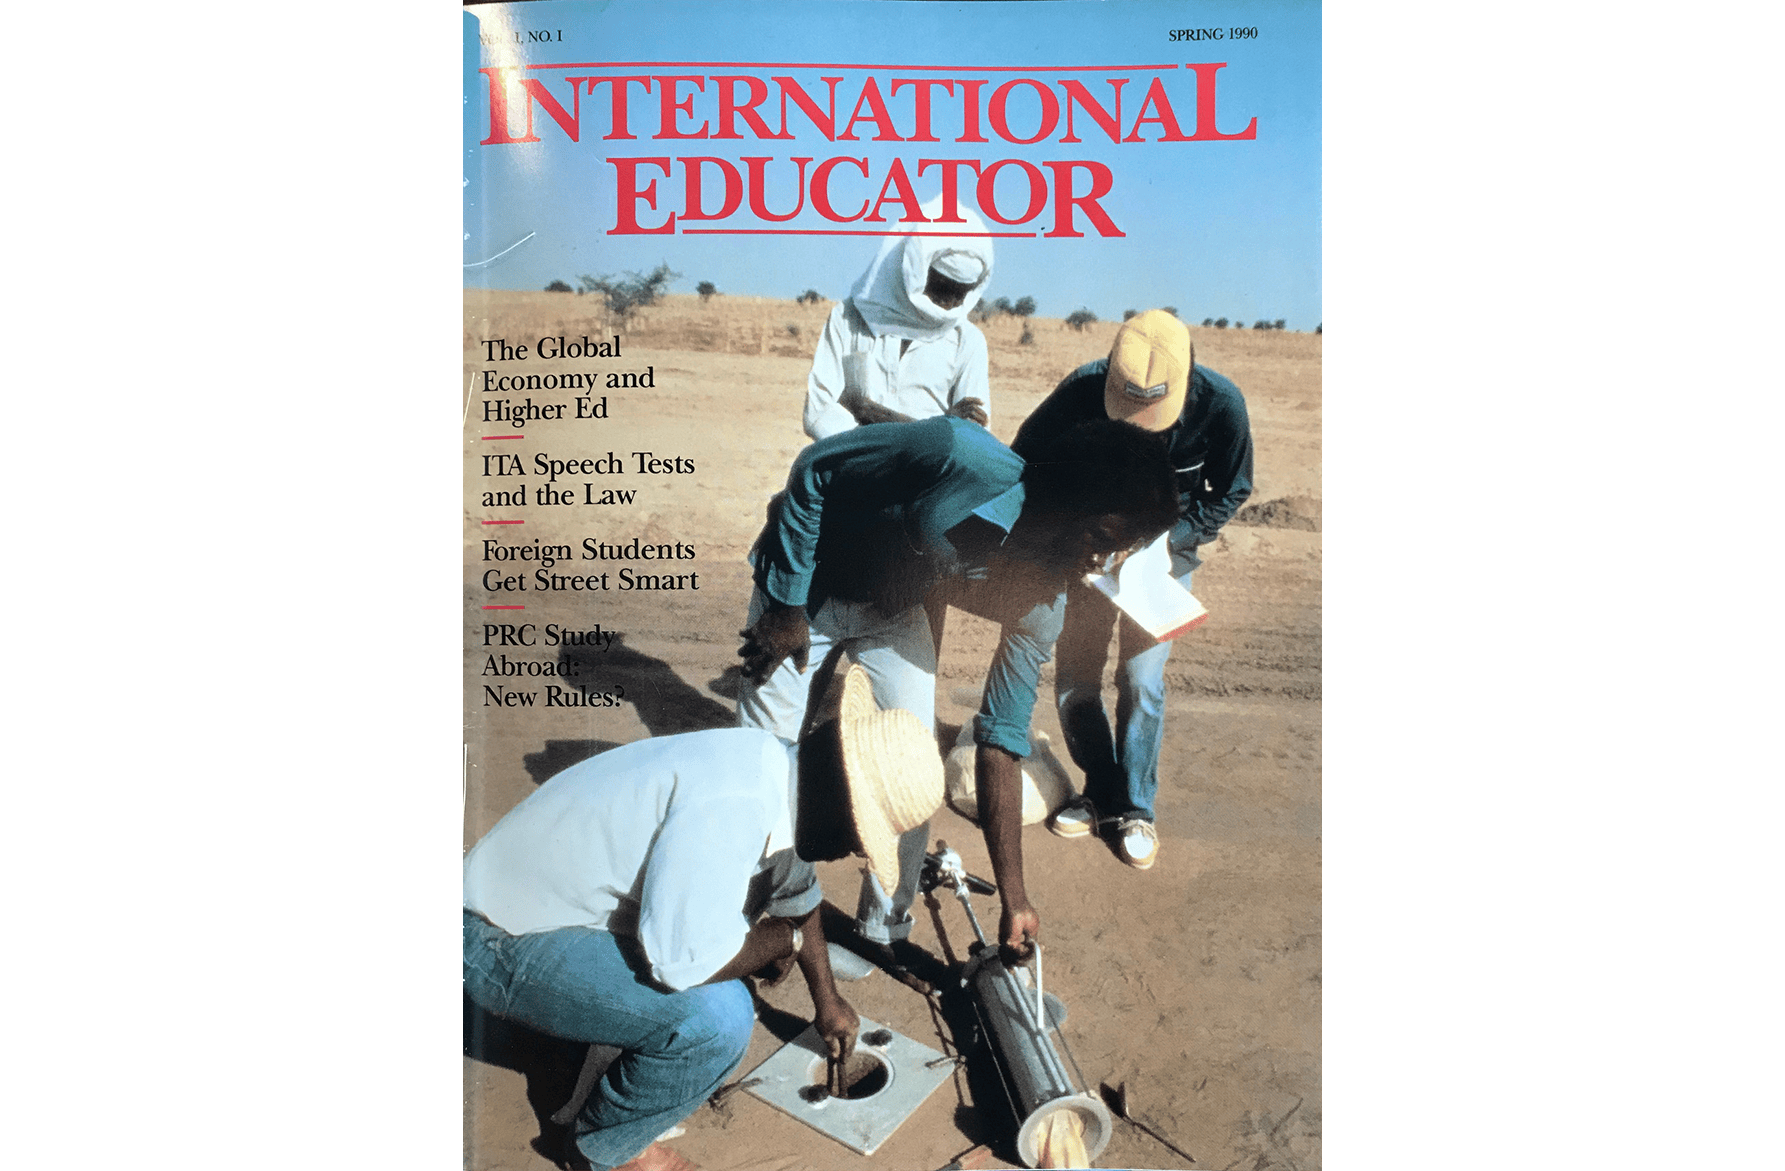 The cover of the first International Educator magazine.